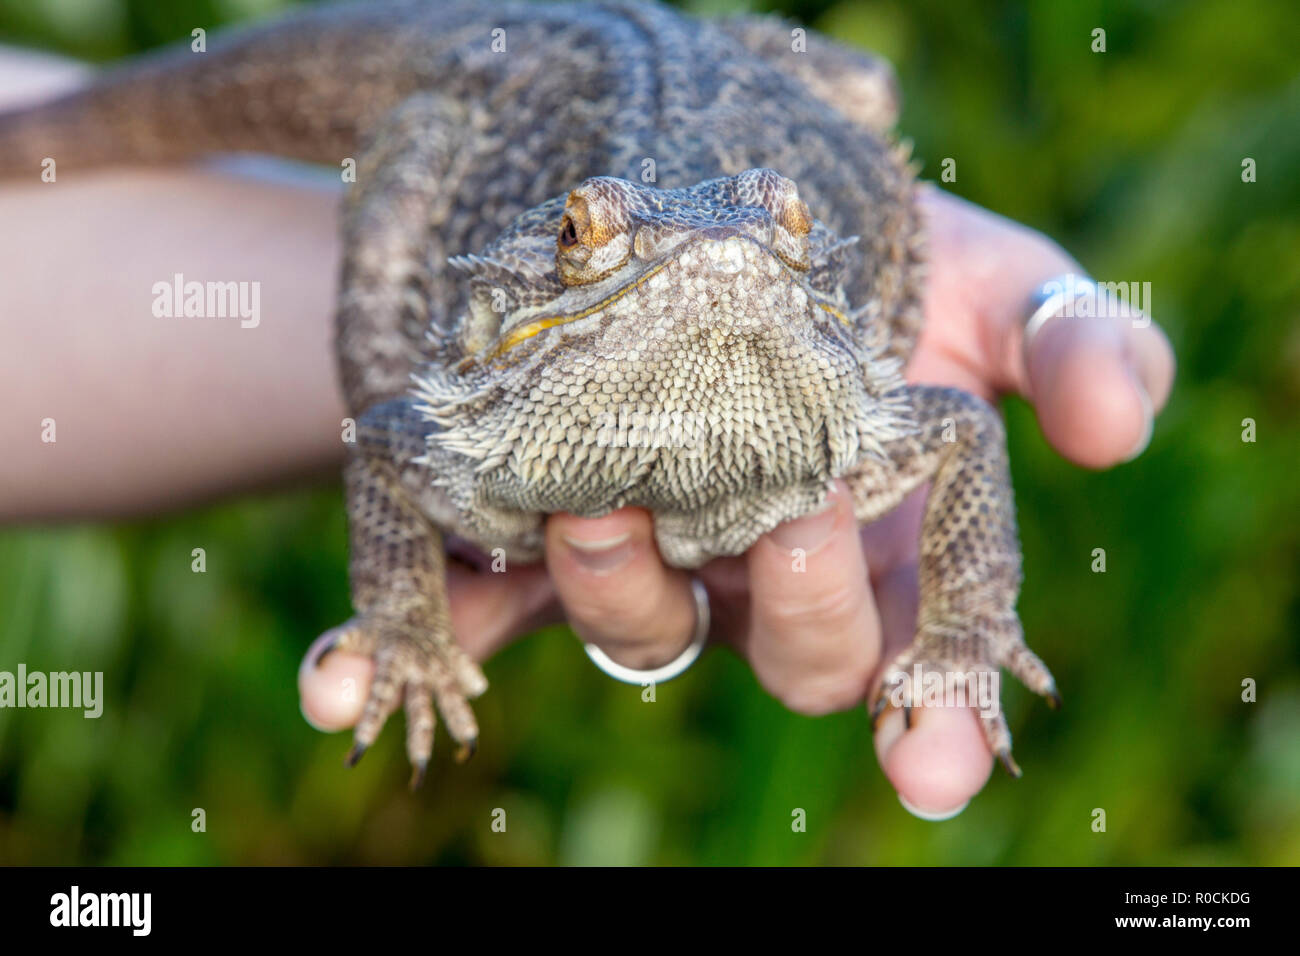 Bearded Dragon in owners hands Stock Photo